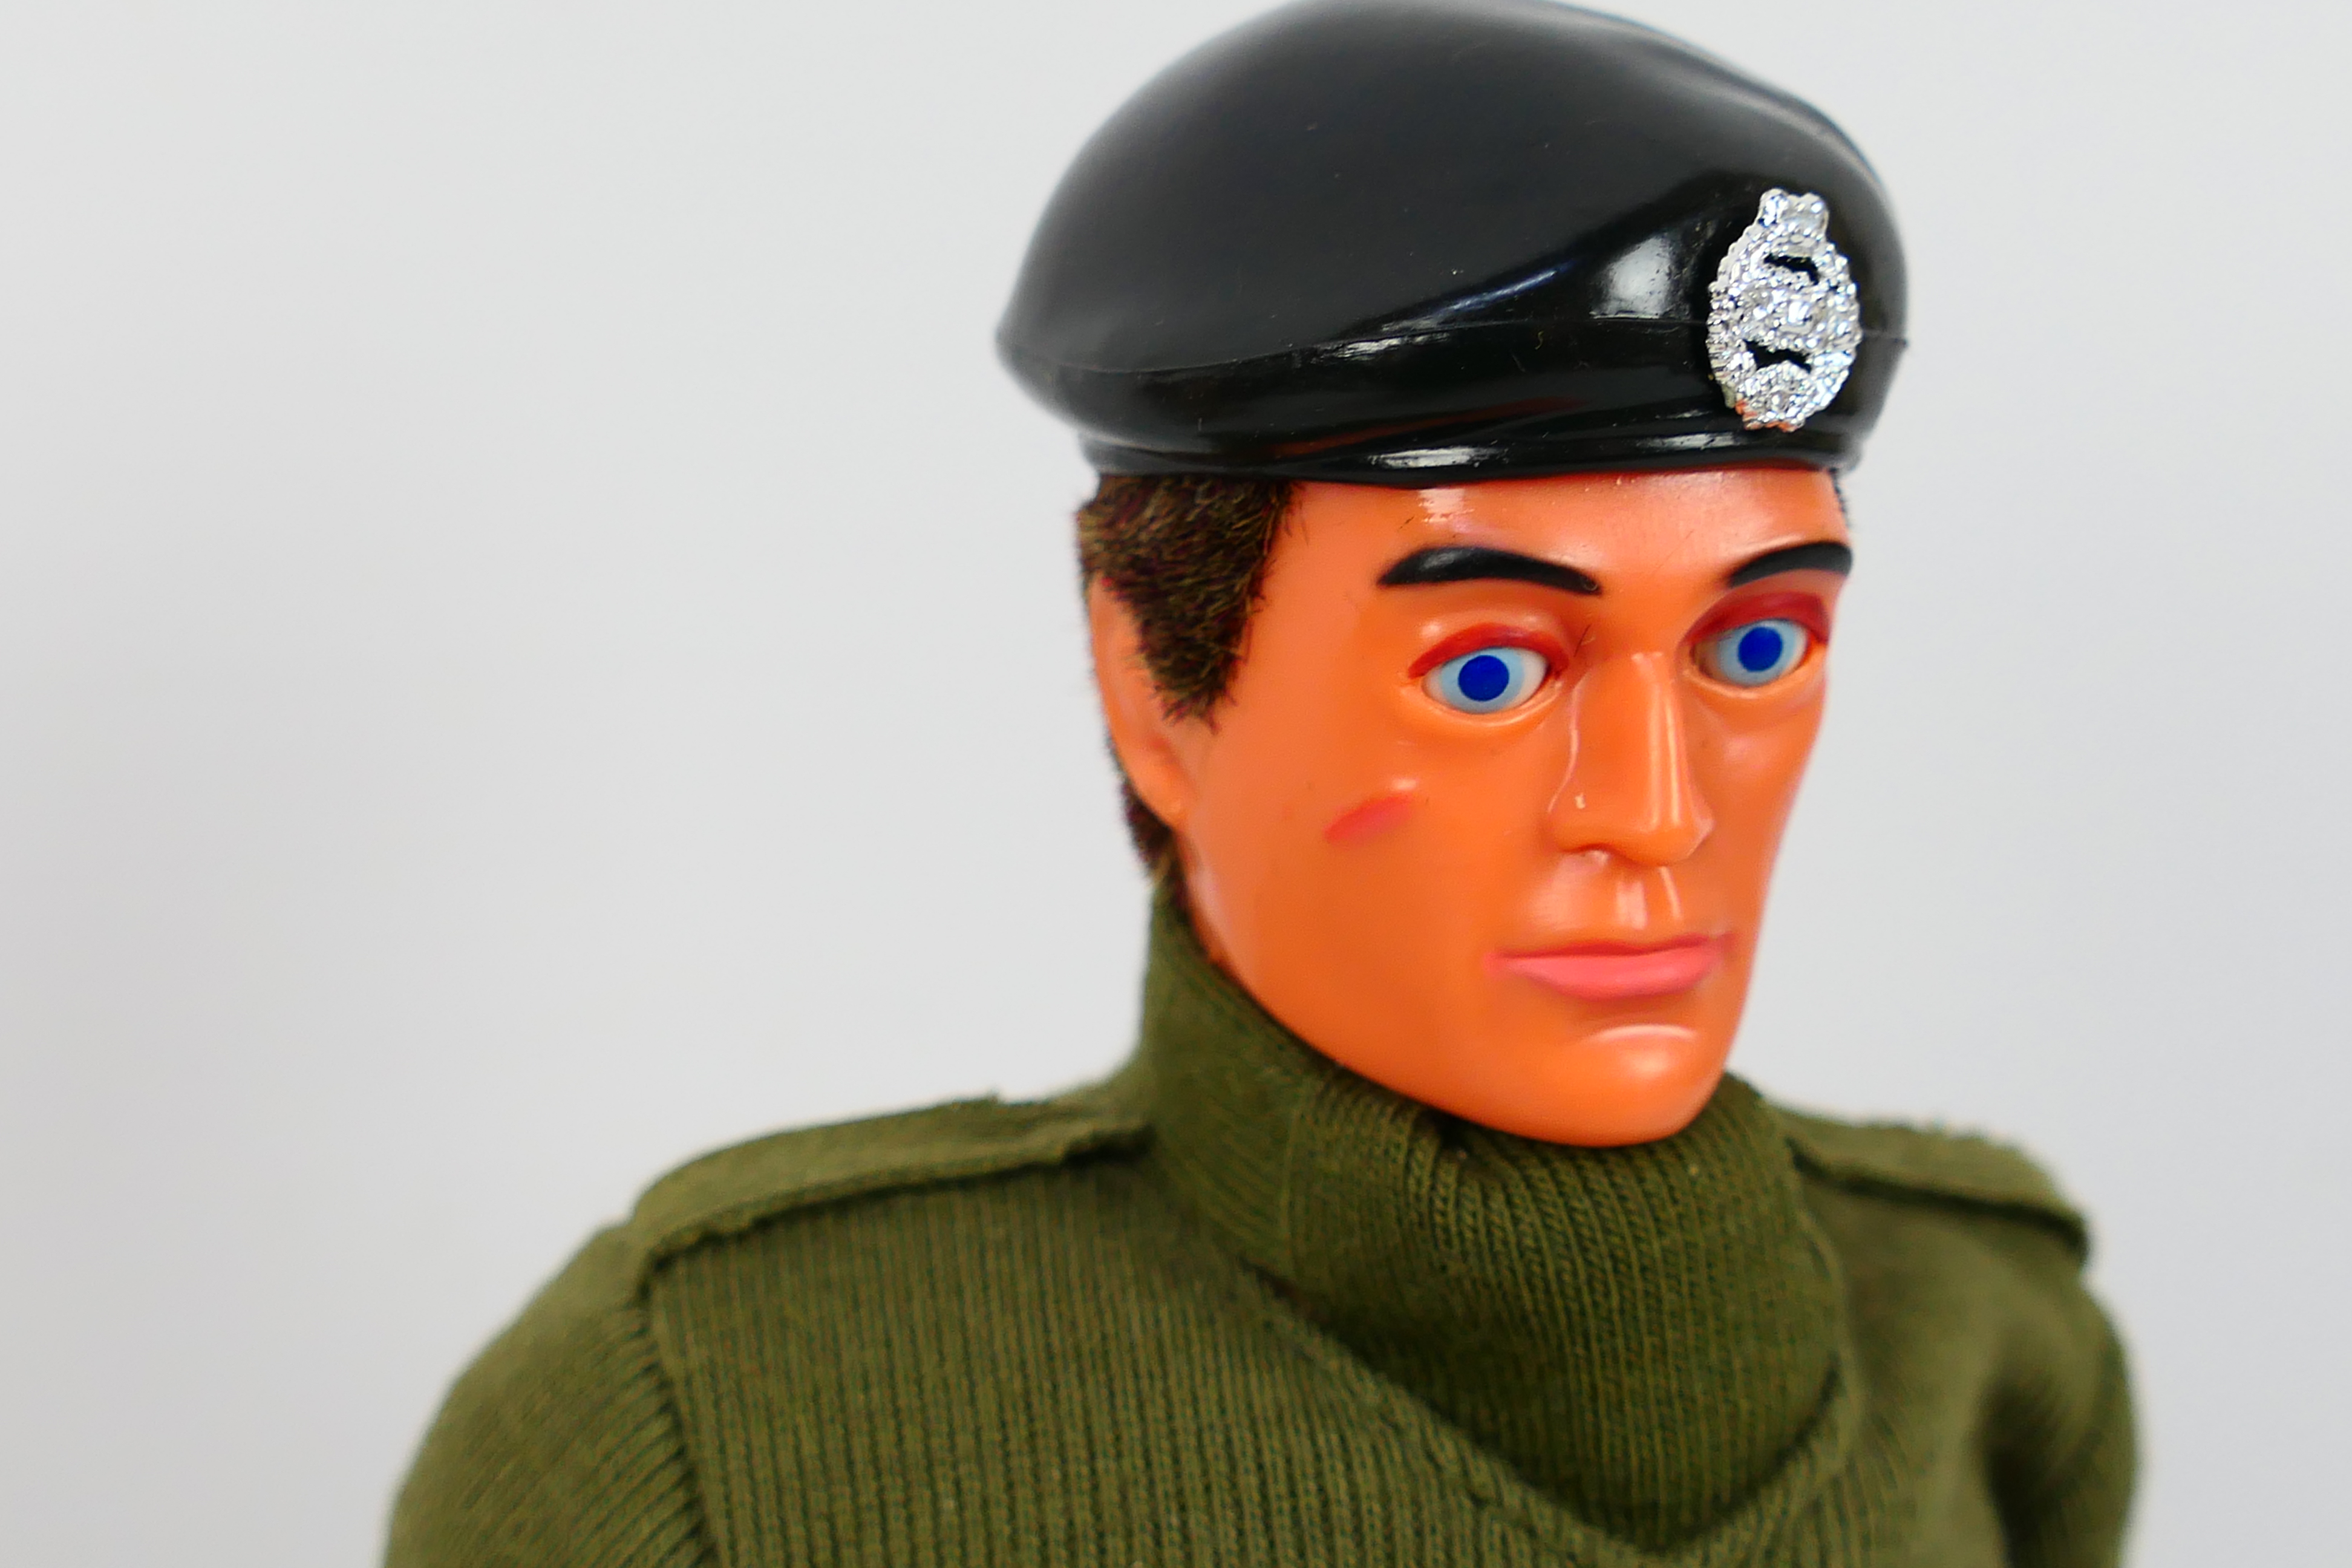 Hasbro - Action Man - A 40th Anniversary Eagle Eye Action Man Soldier. - Image 7 of 8